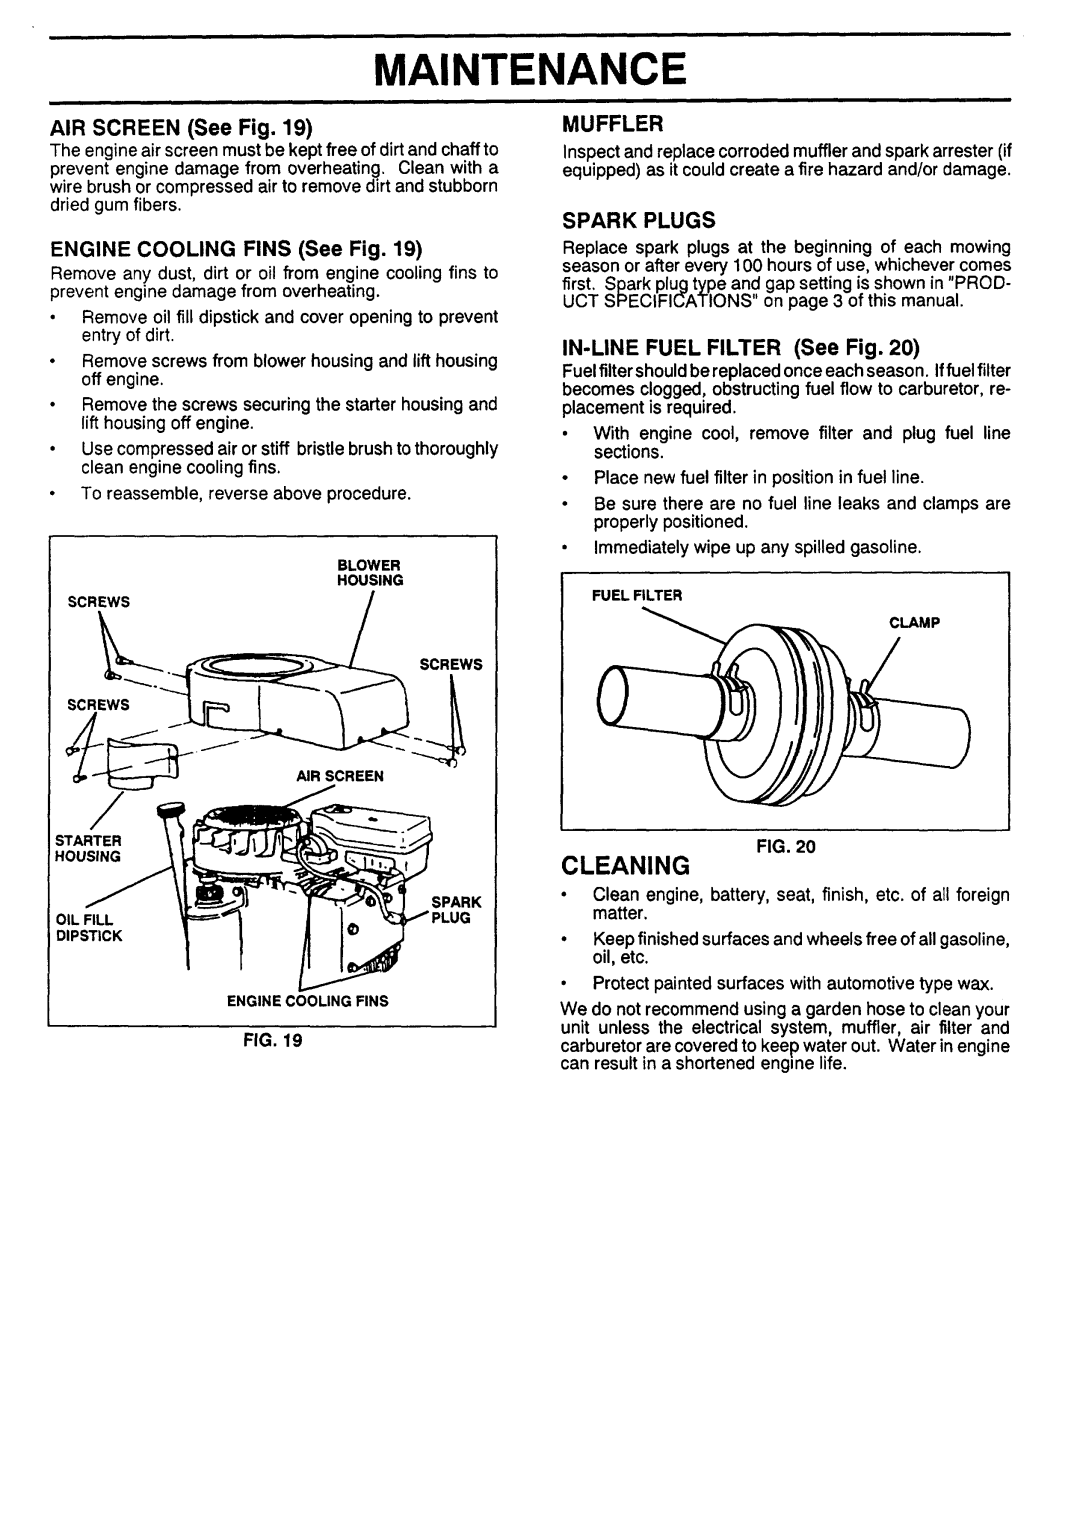 Sears 917.257462 manual Cleaning, AIR SCREEN See Fig, Muffler, ENGINE COOLING FINS See Fig, Spark Plugs, Maintenance 